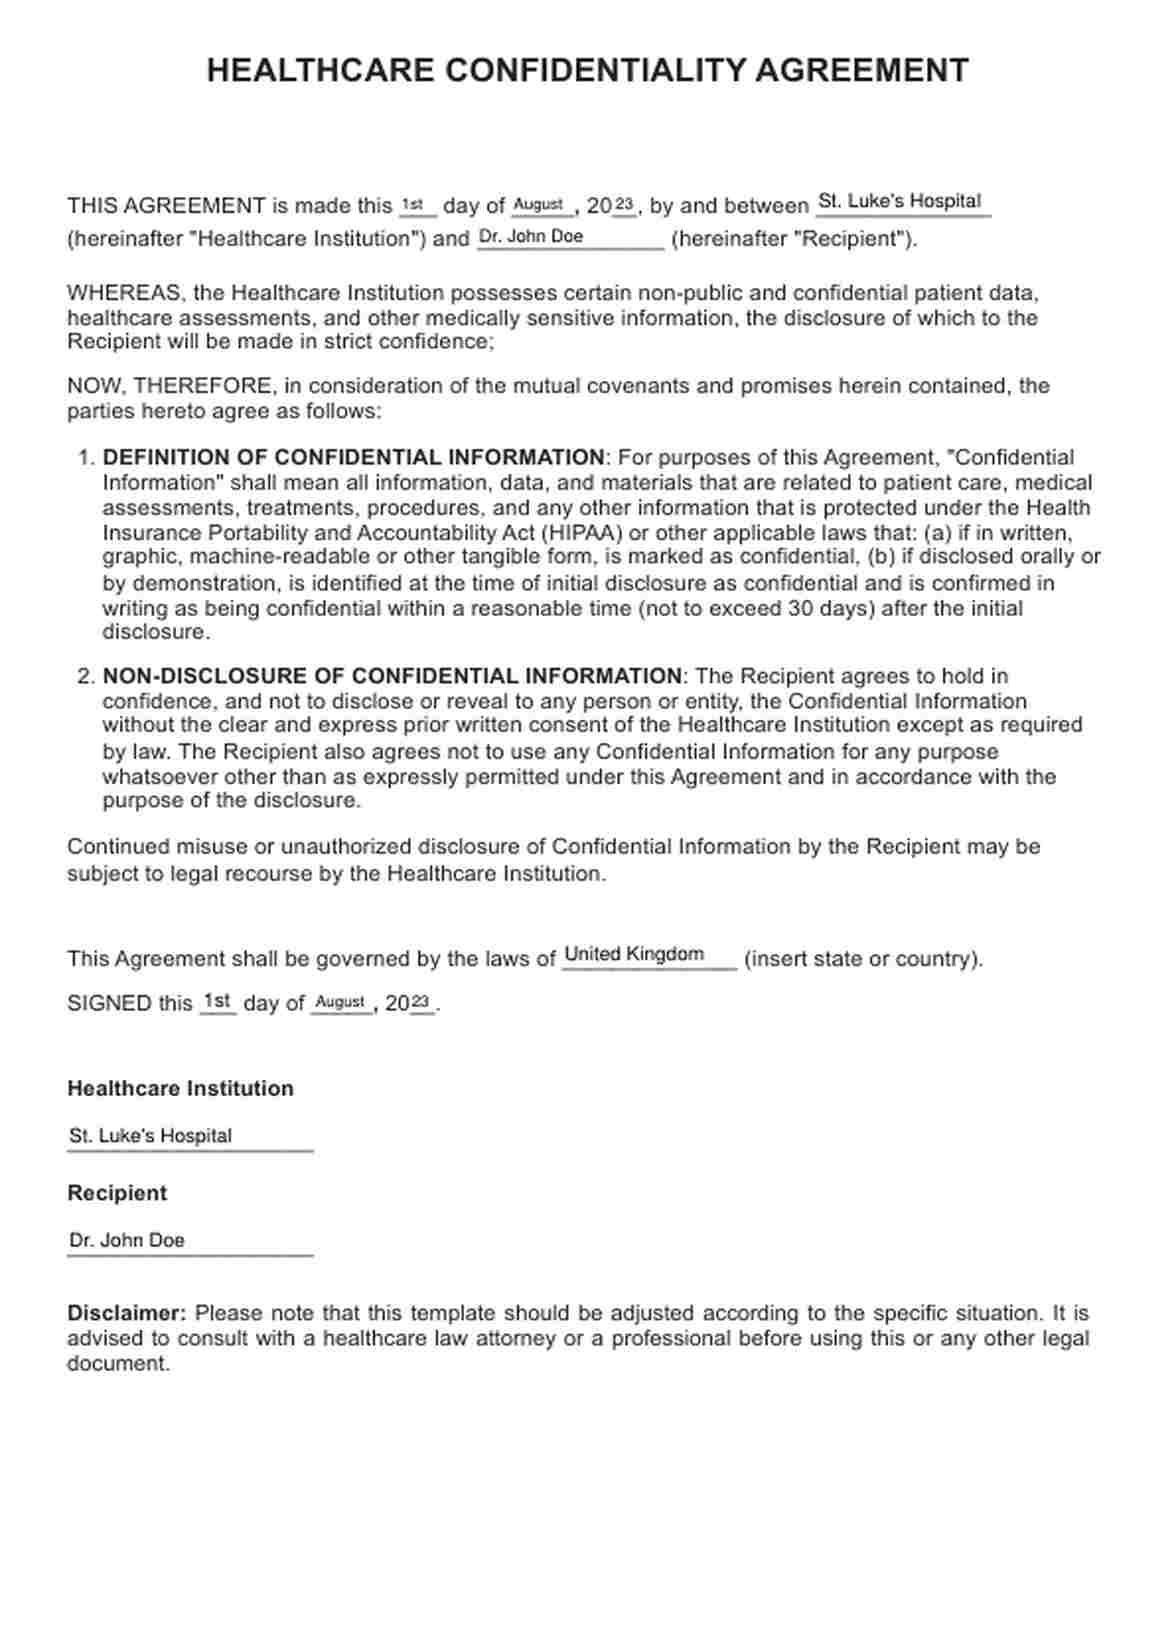 Confidentiality Statements PDF Example